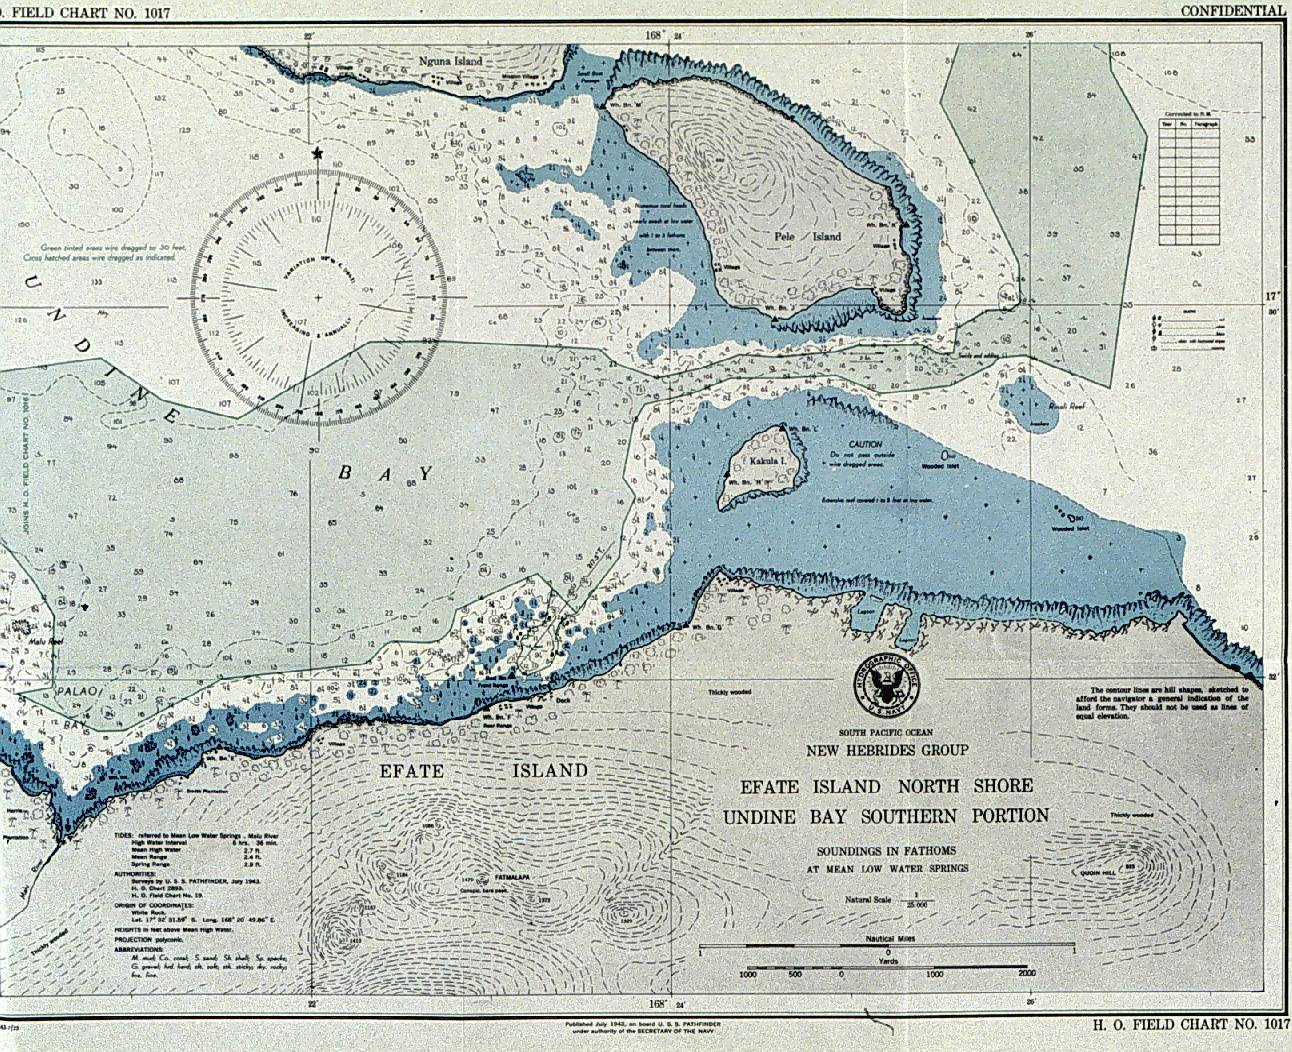 Chart of Efate Island produced on board the PATHFINDER